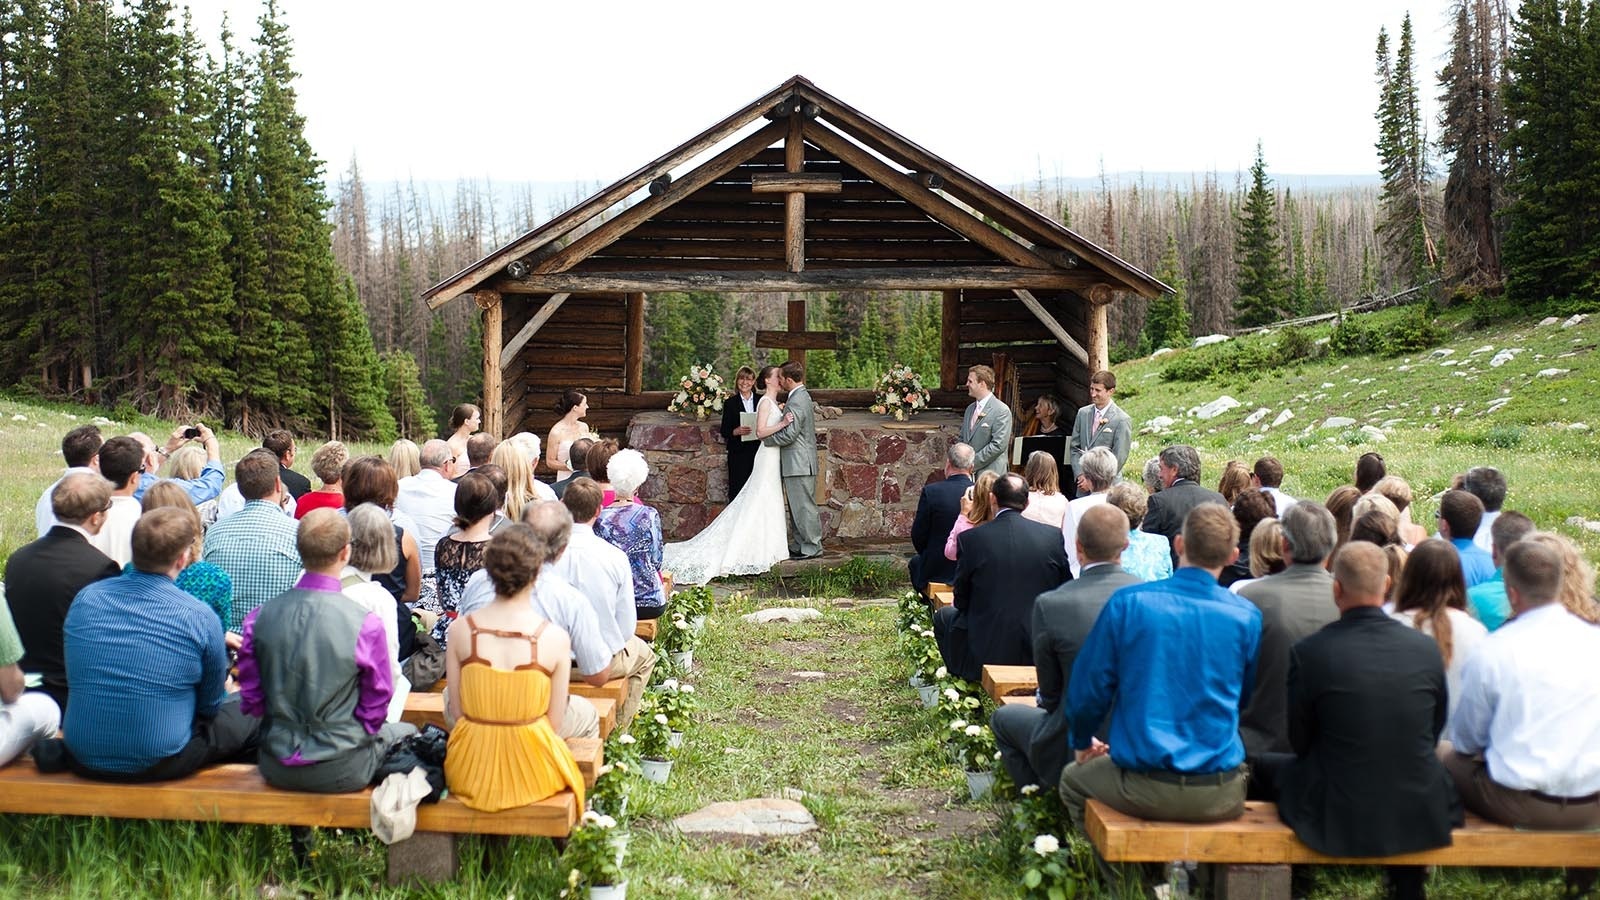 St. Alban's Chapel in the scenic Snowy Range Mountains in southern Wyoming is a favorite spot for spring and early summer weddings.